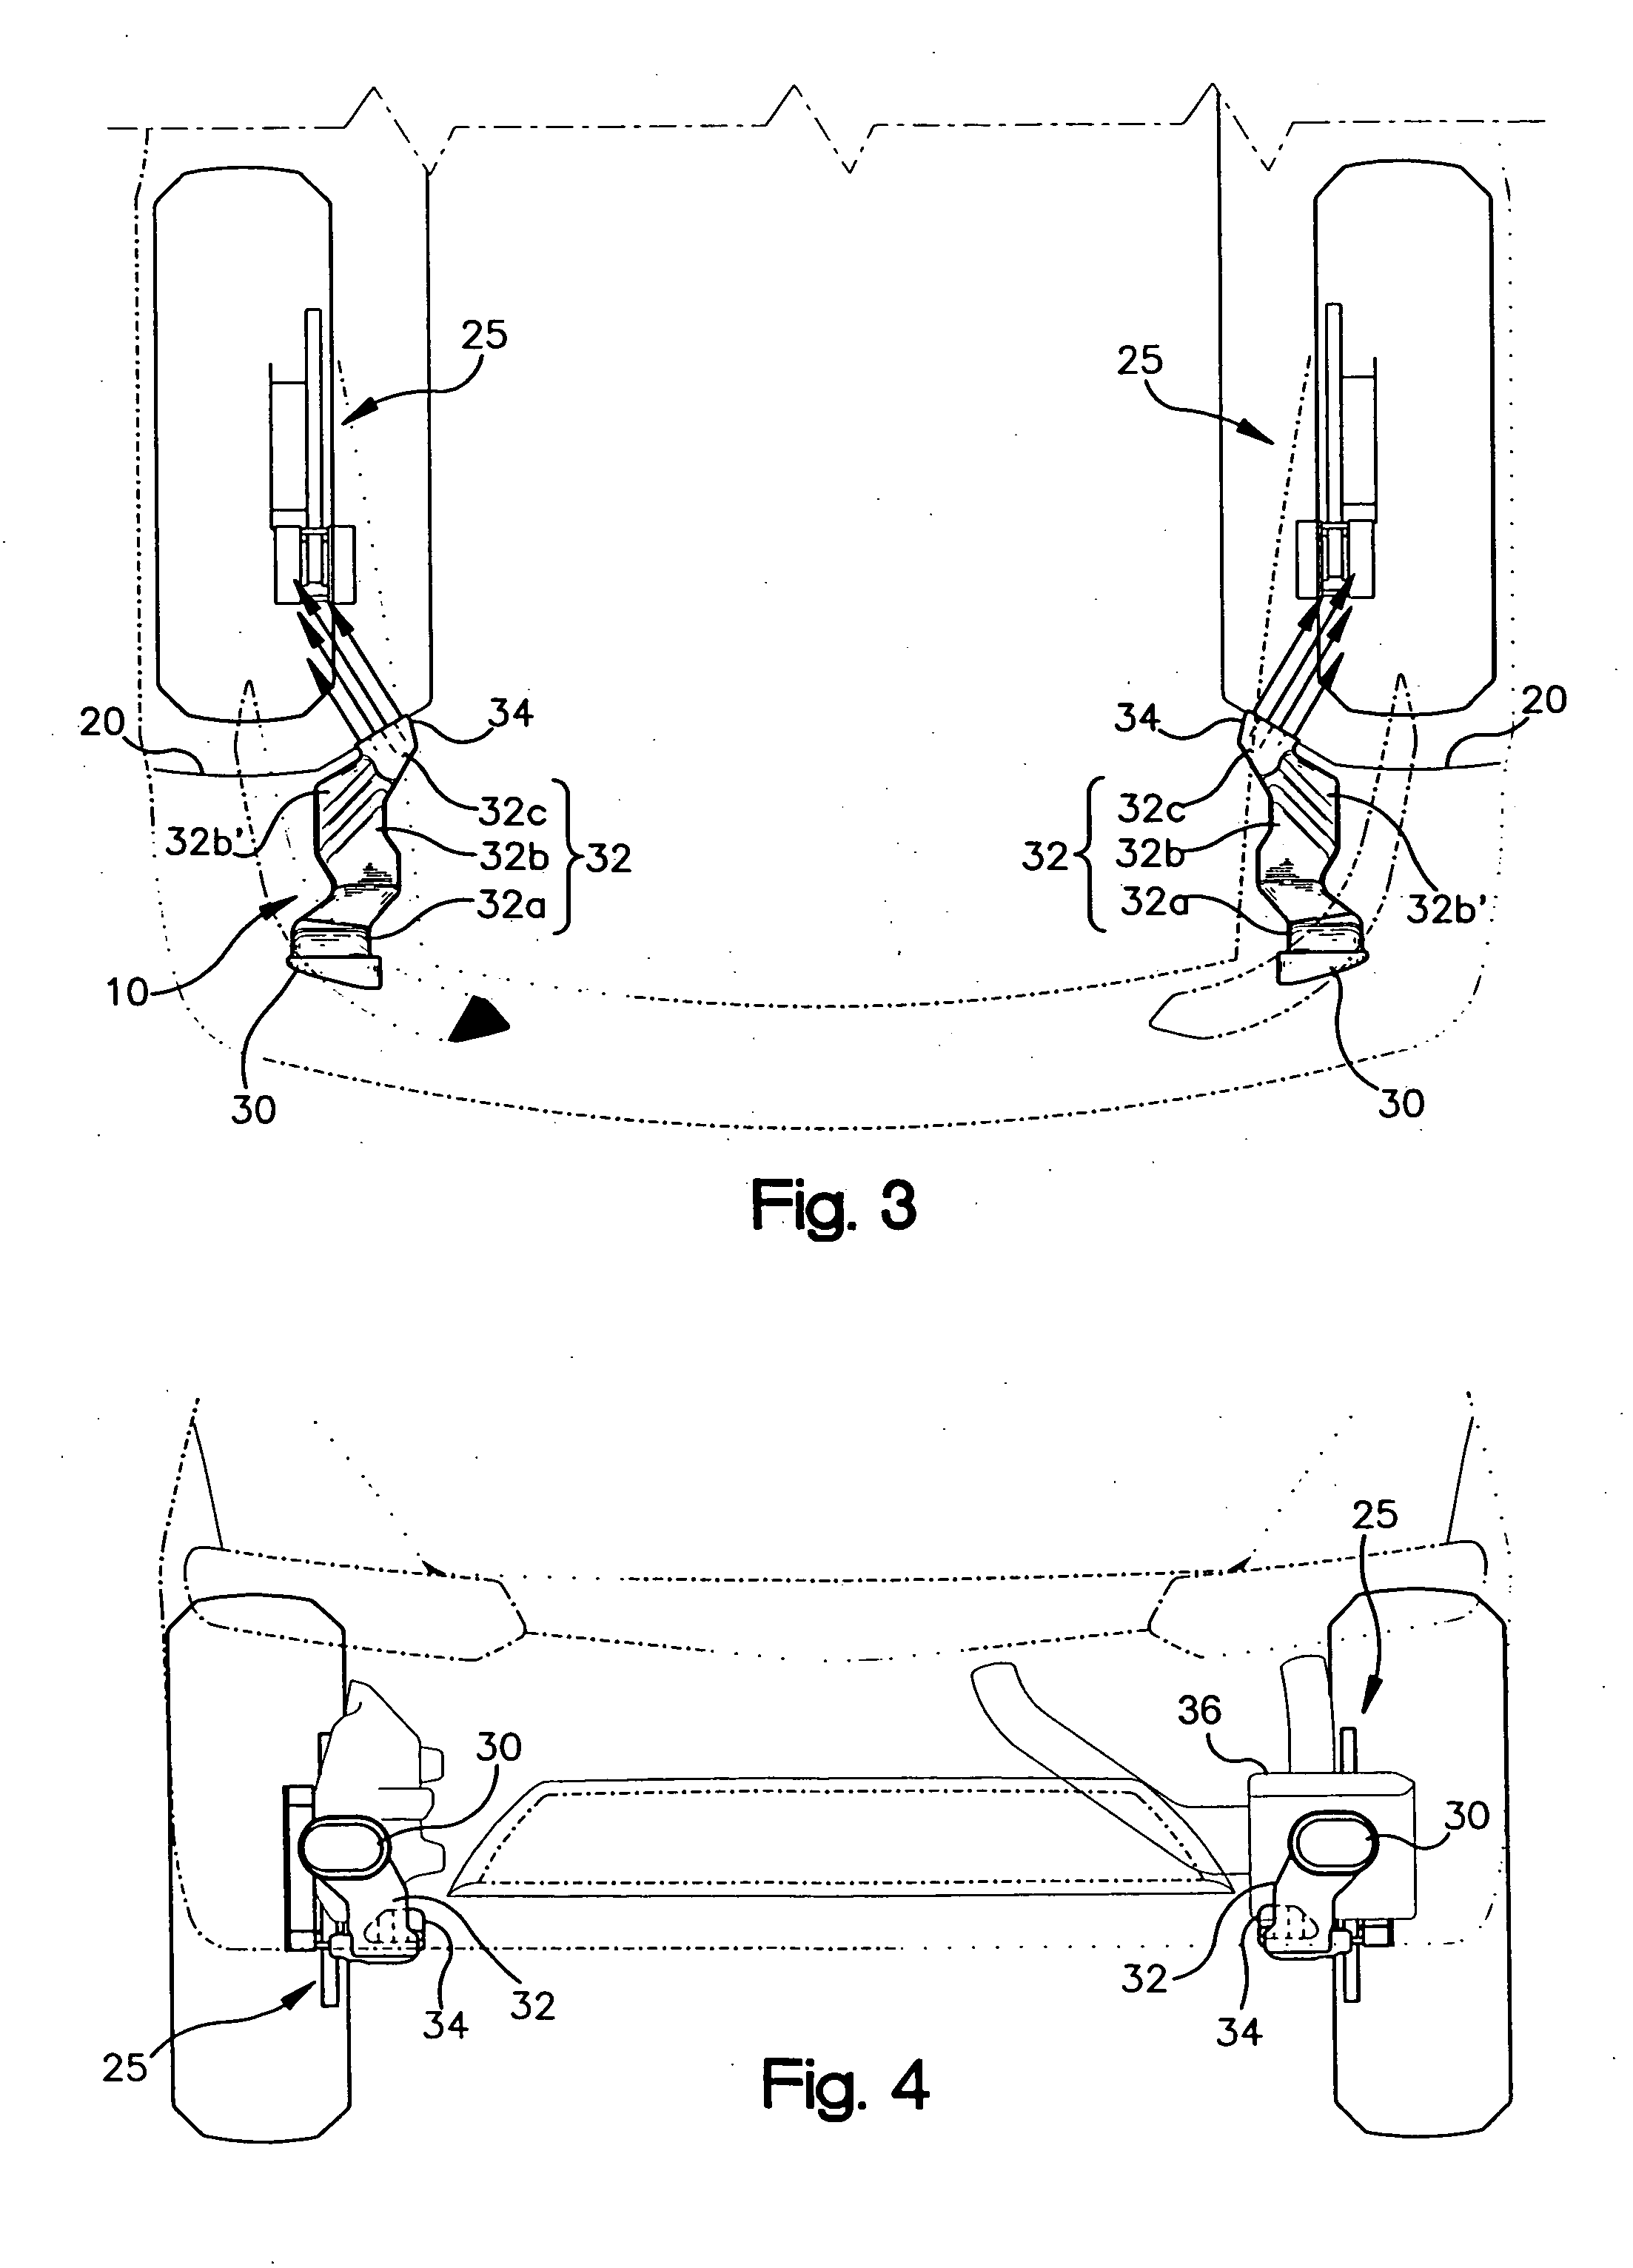 Finned brake duct to divert cooling air to a vehicle brake system